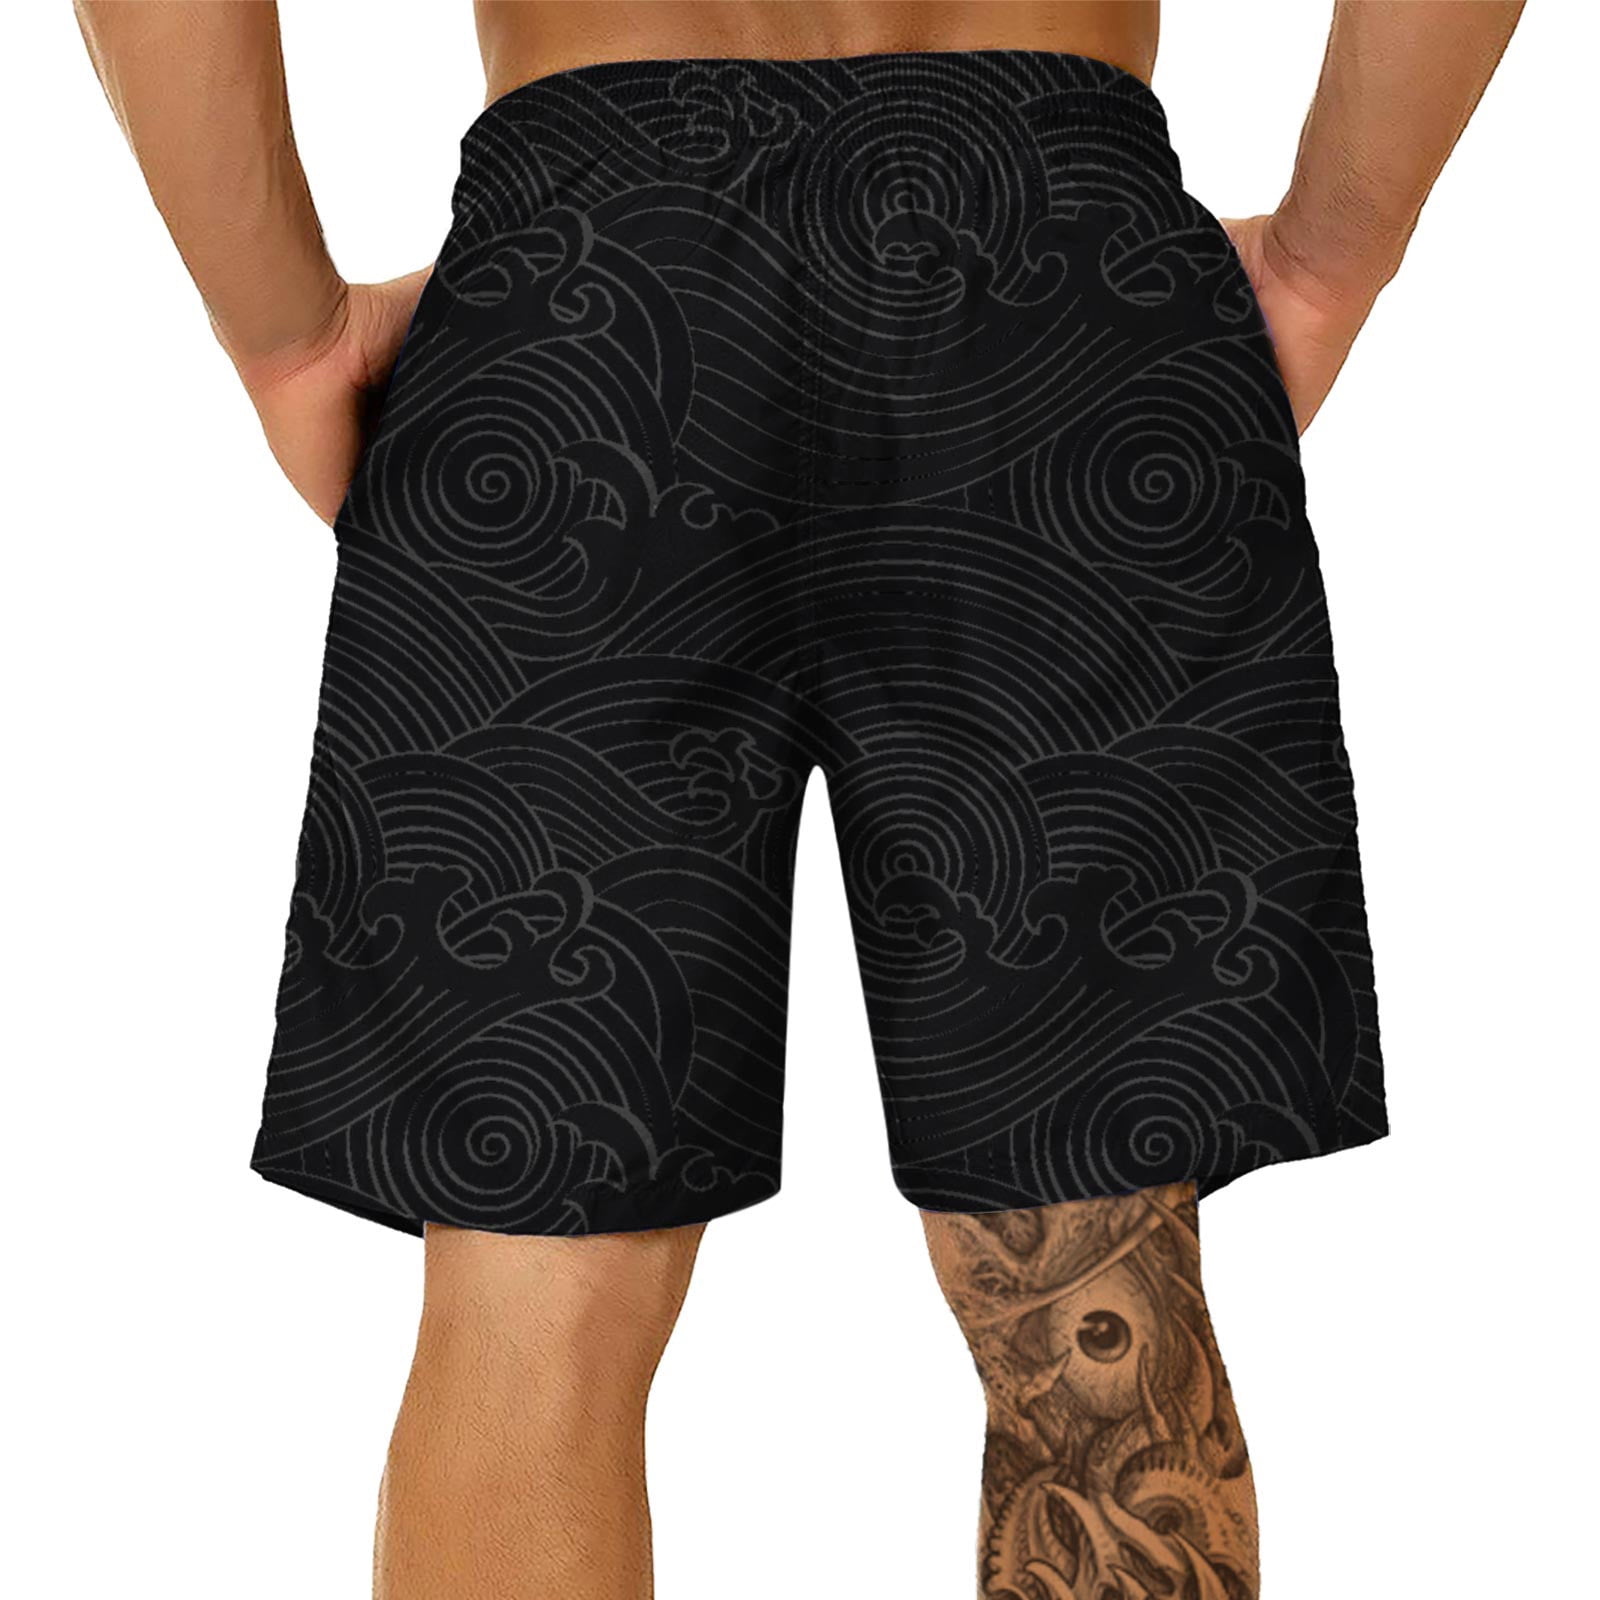 Leisue Hand Drawn Cartoon Lotus Quick Dry Elastic Lace Boardshorts Beach Shorts Pants Swim Trunks Mens Swimsuit with Pockets